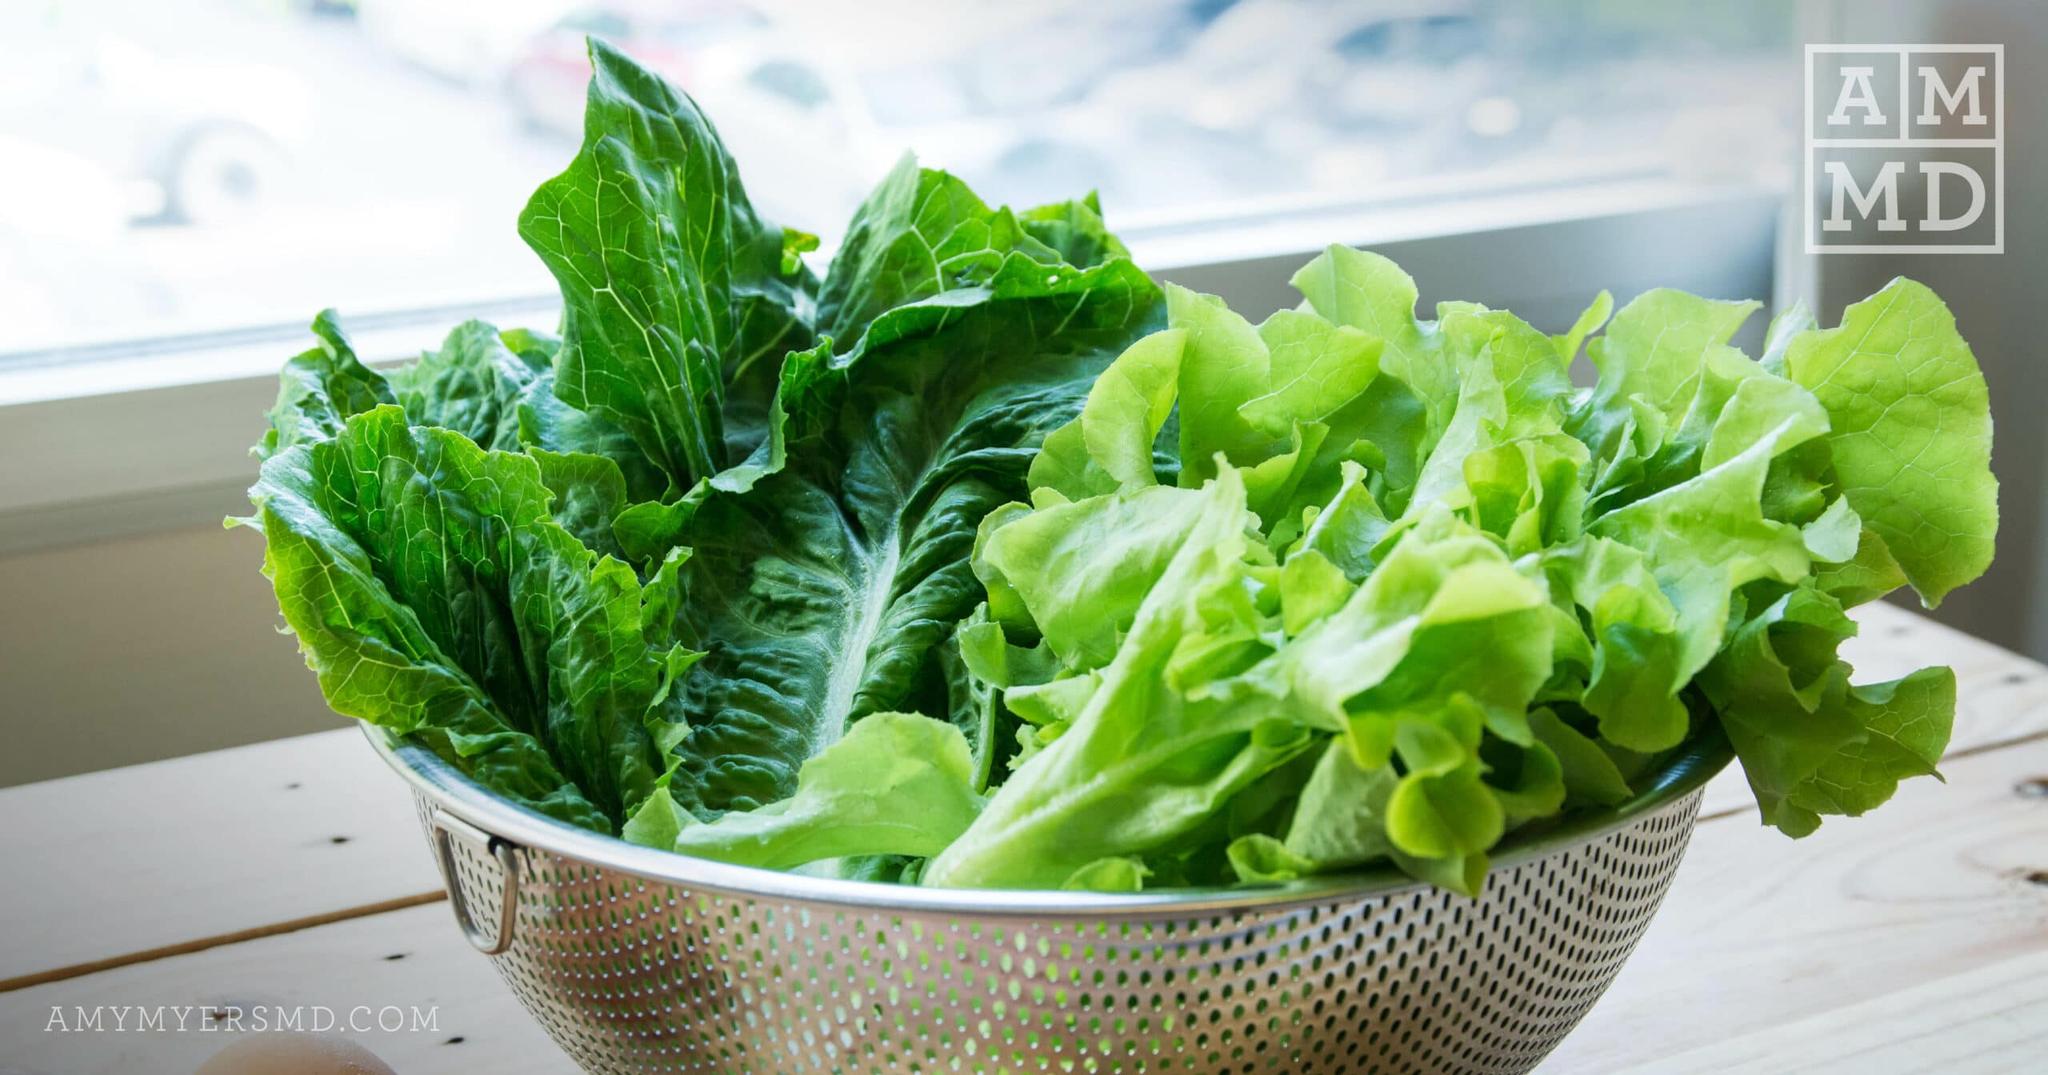 benefits of leafy greens